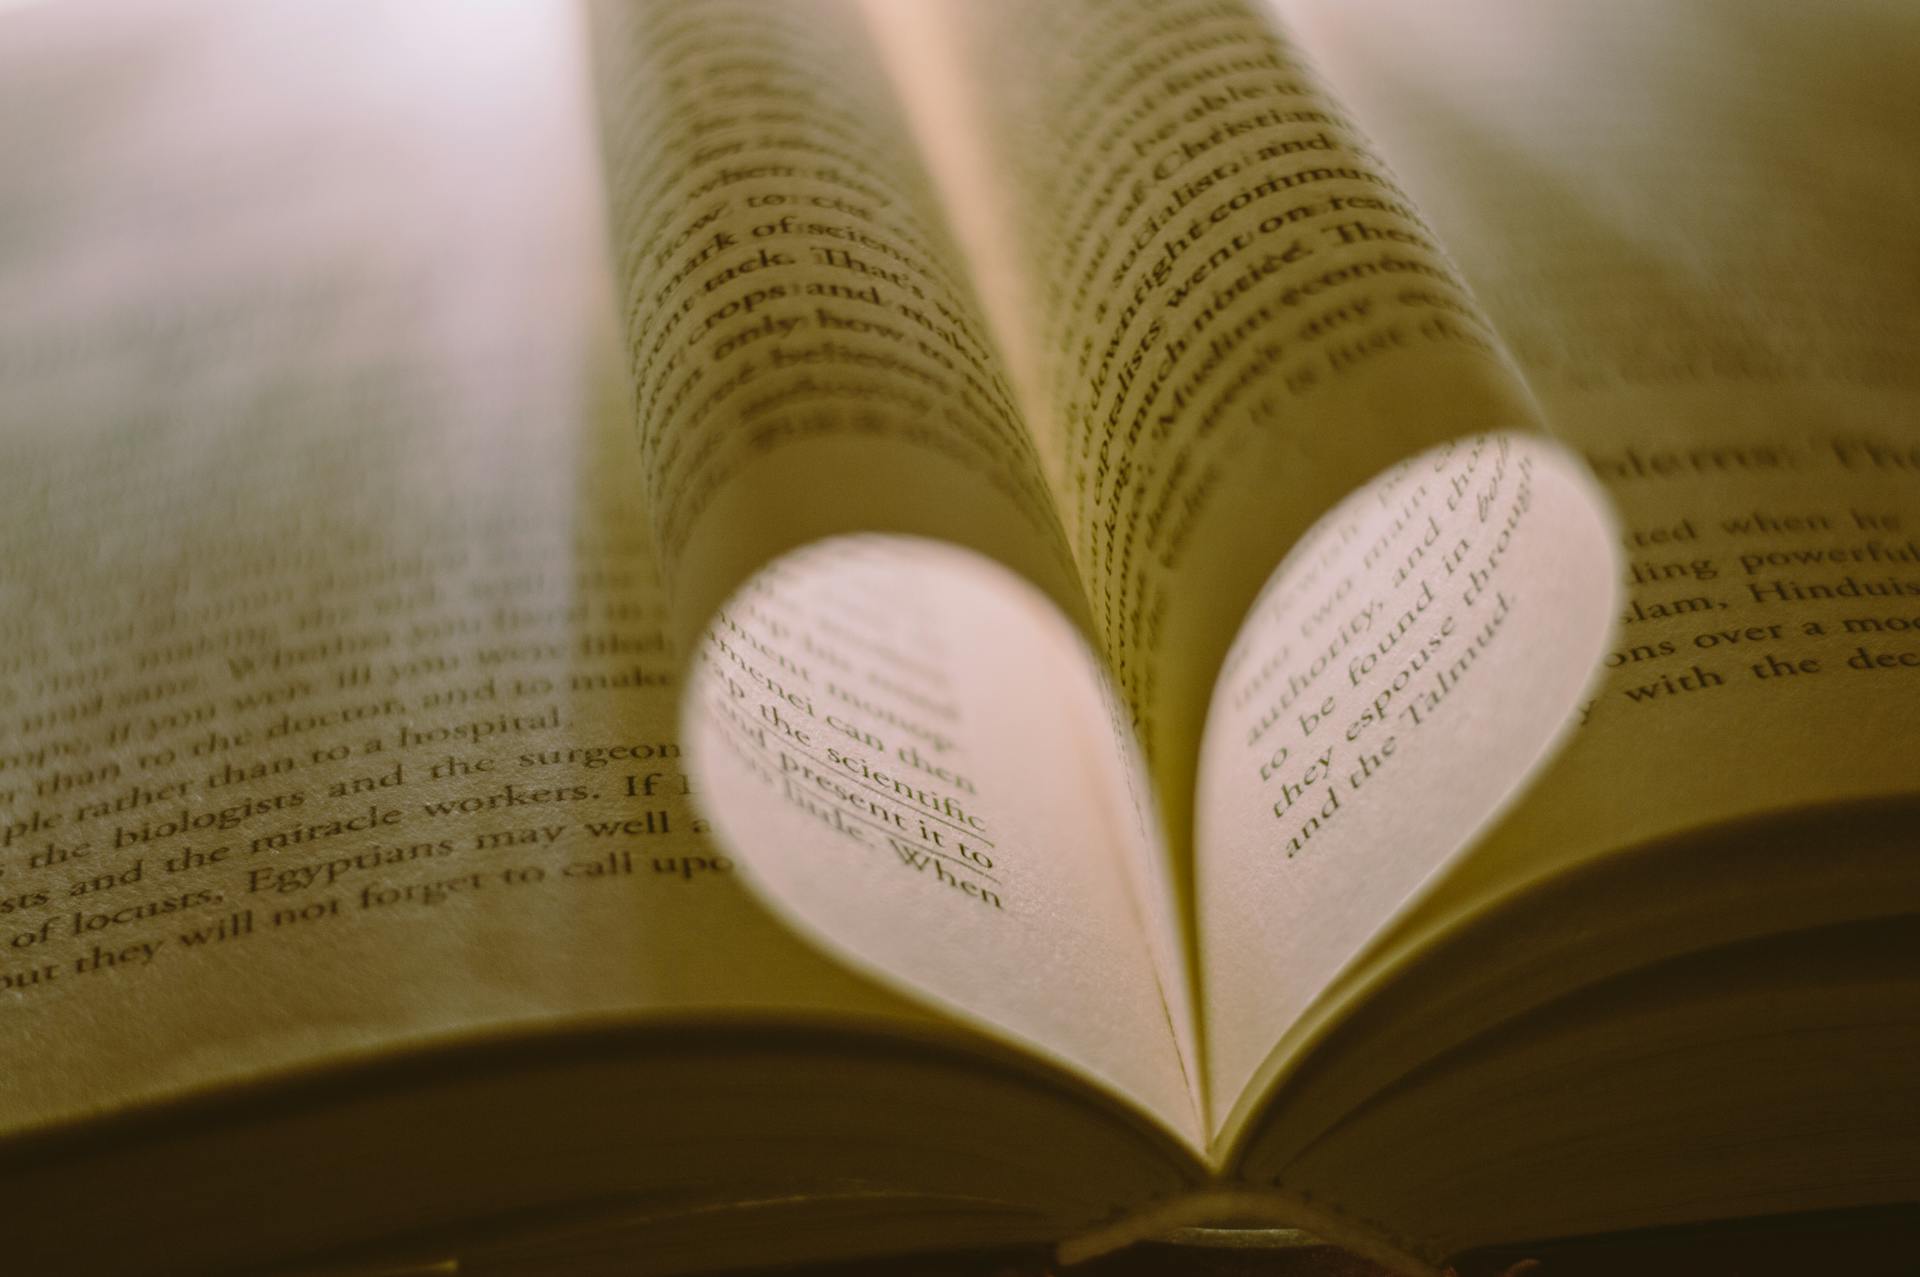 The pages of a book forming a heart | Source: Pexels